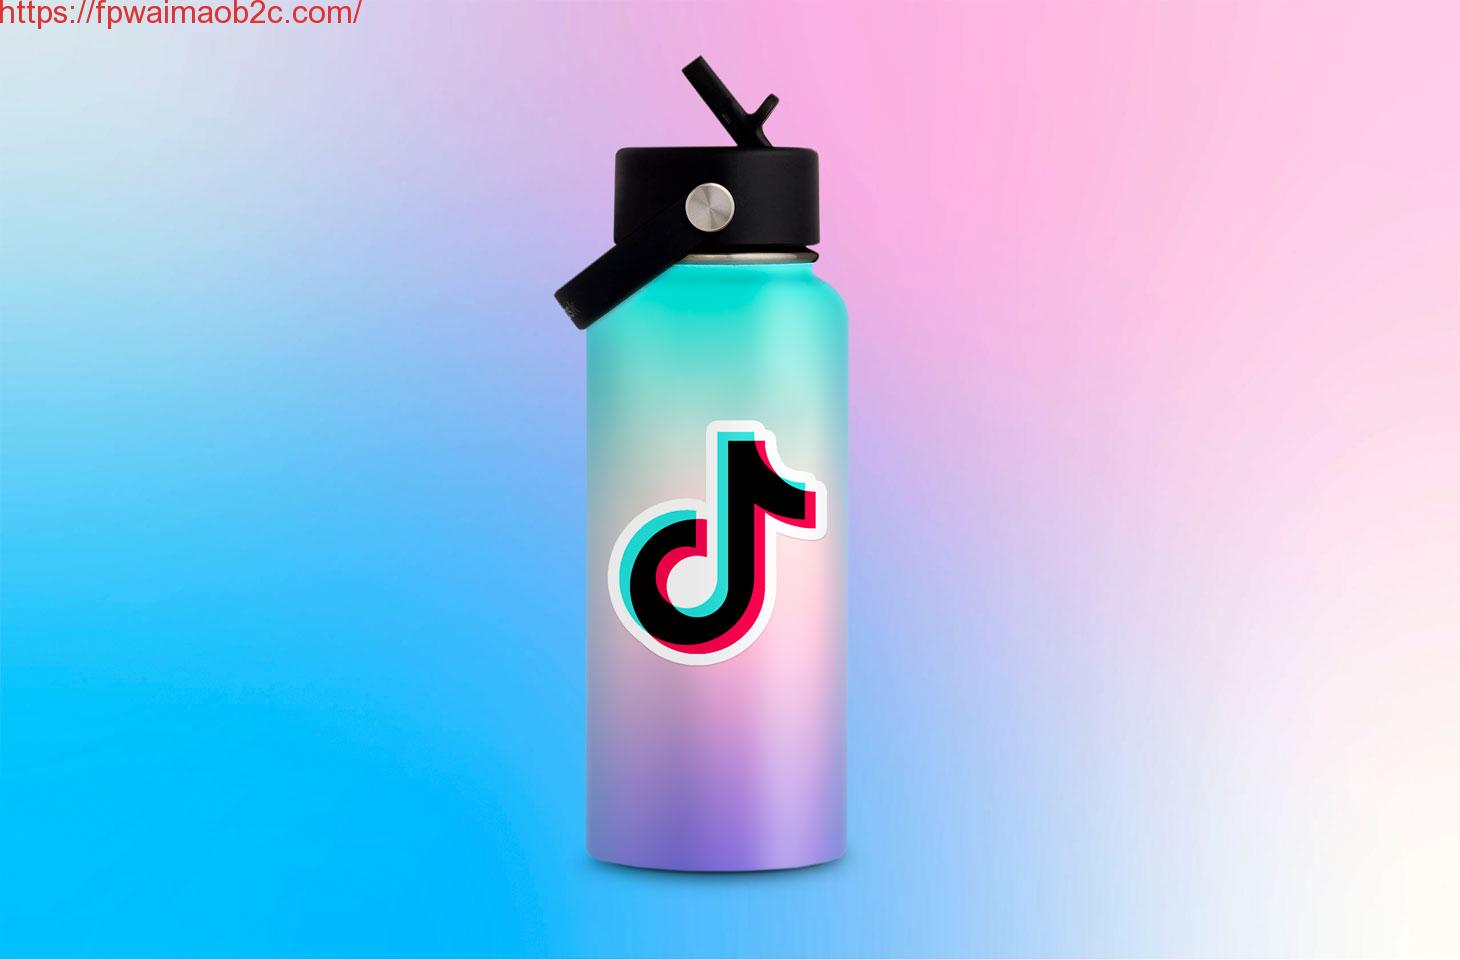 How to set up security and privacy in TikTok | Kaspersky official blog